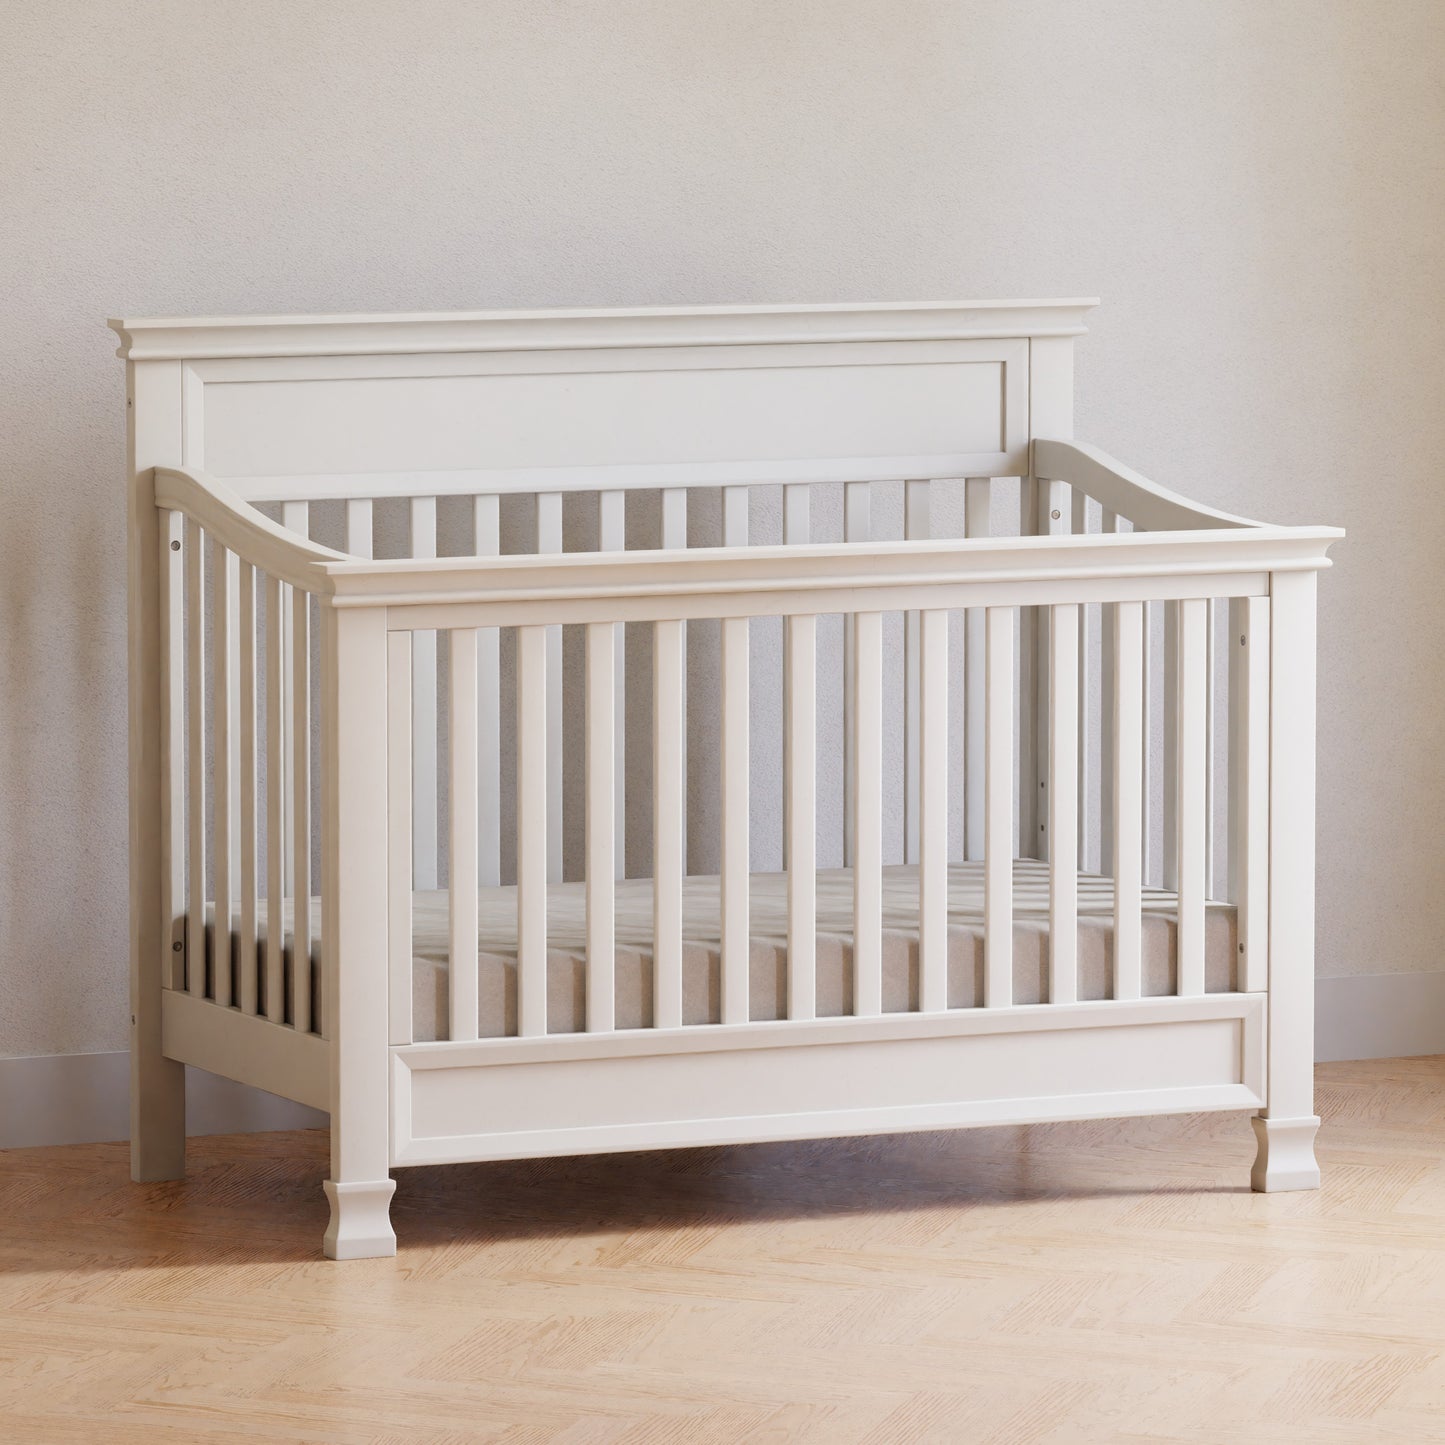 M3901RW,Foothill 4-in-1 Convertible Crib in Warm White